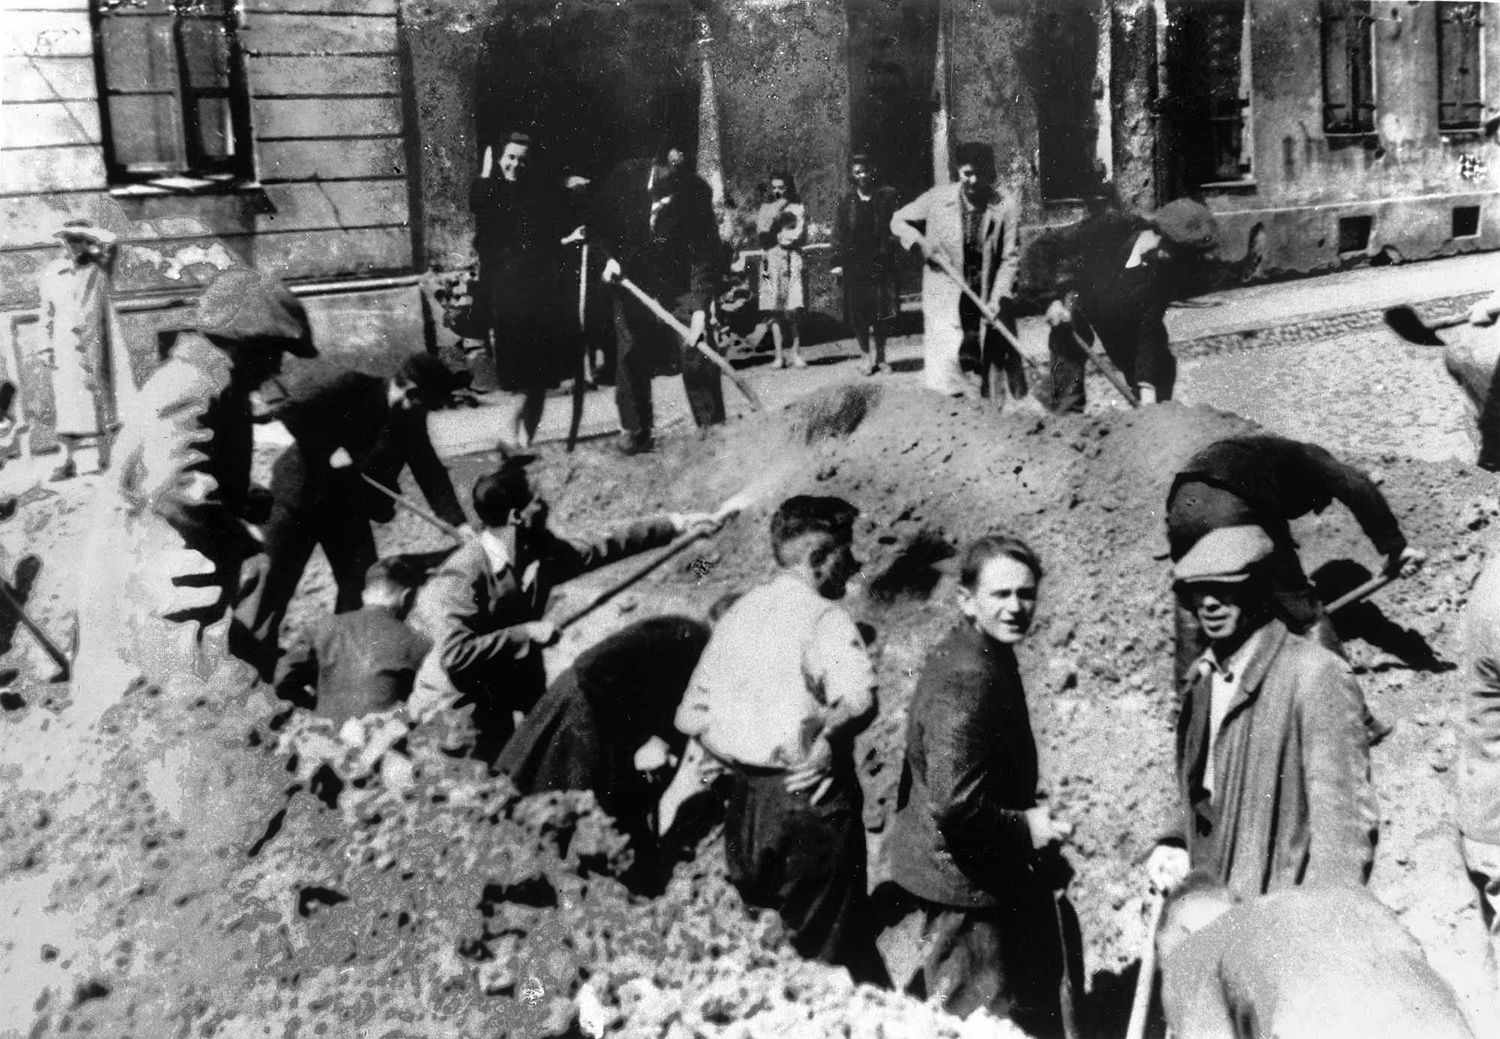 To ward off a panzer attack, Warsaw citizens dig an anti-tank trench in a street in the Wola District.